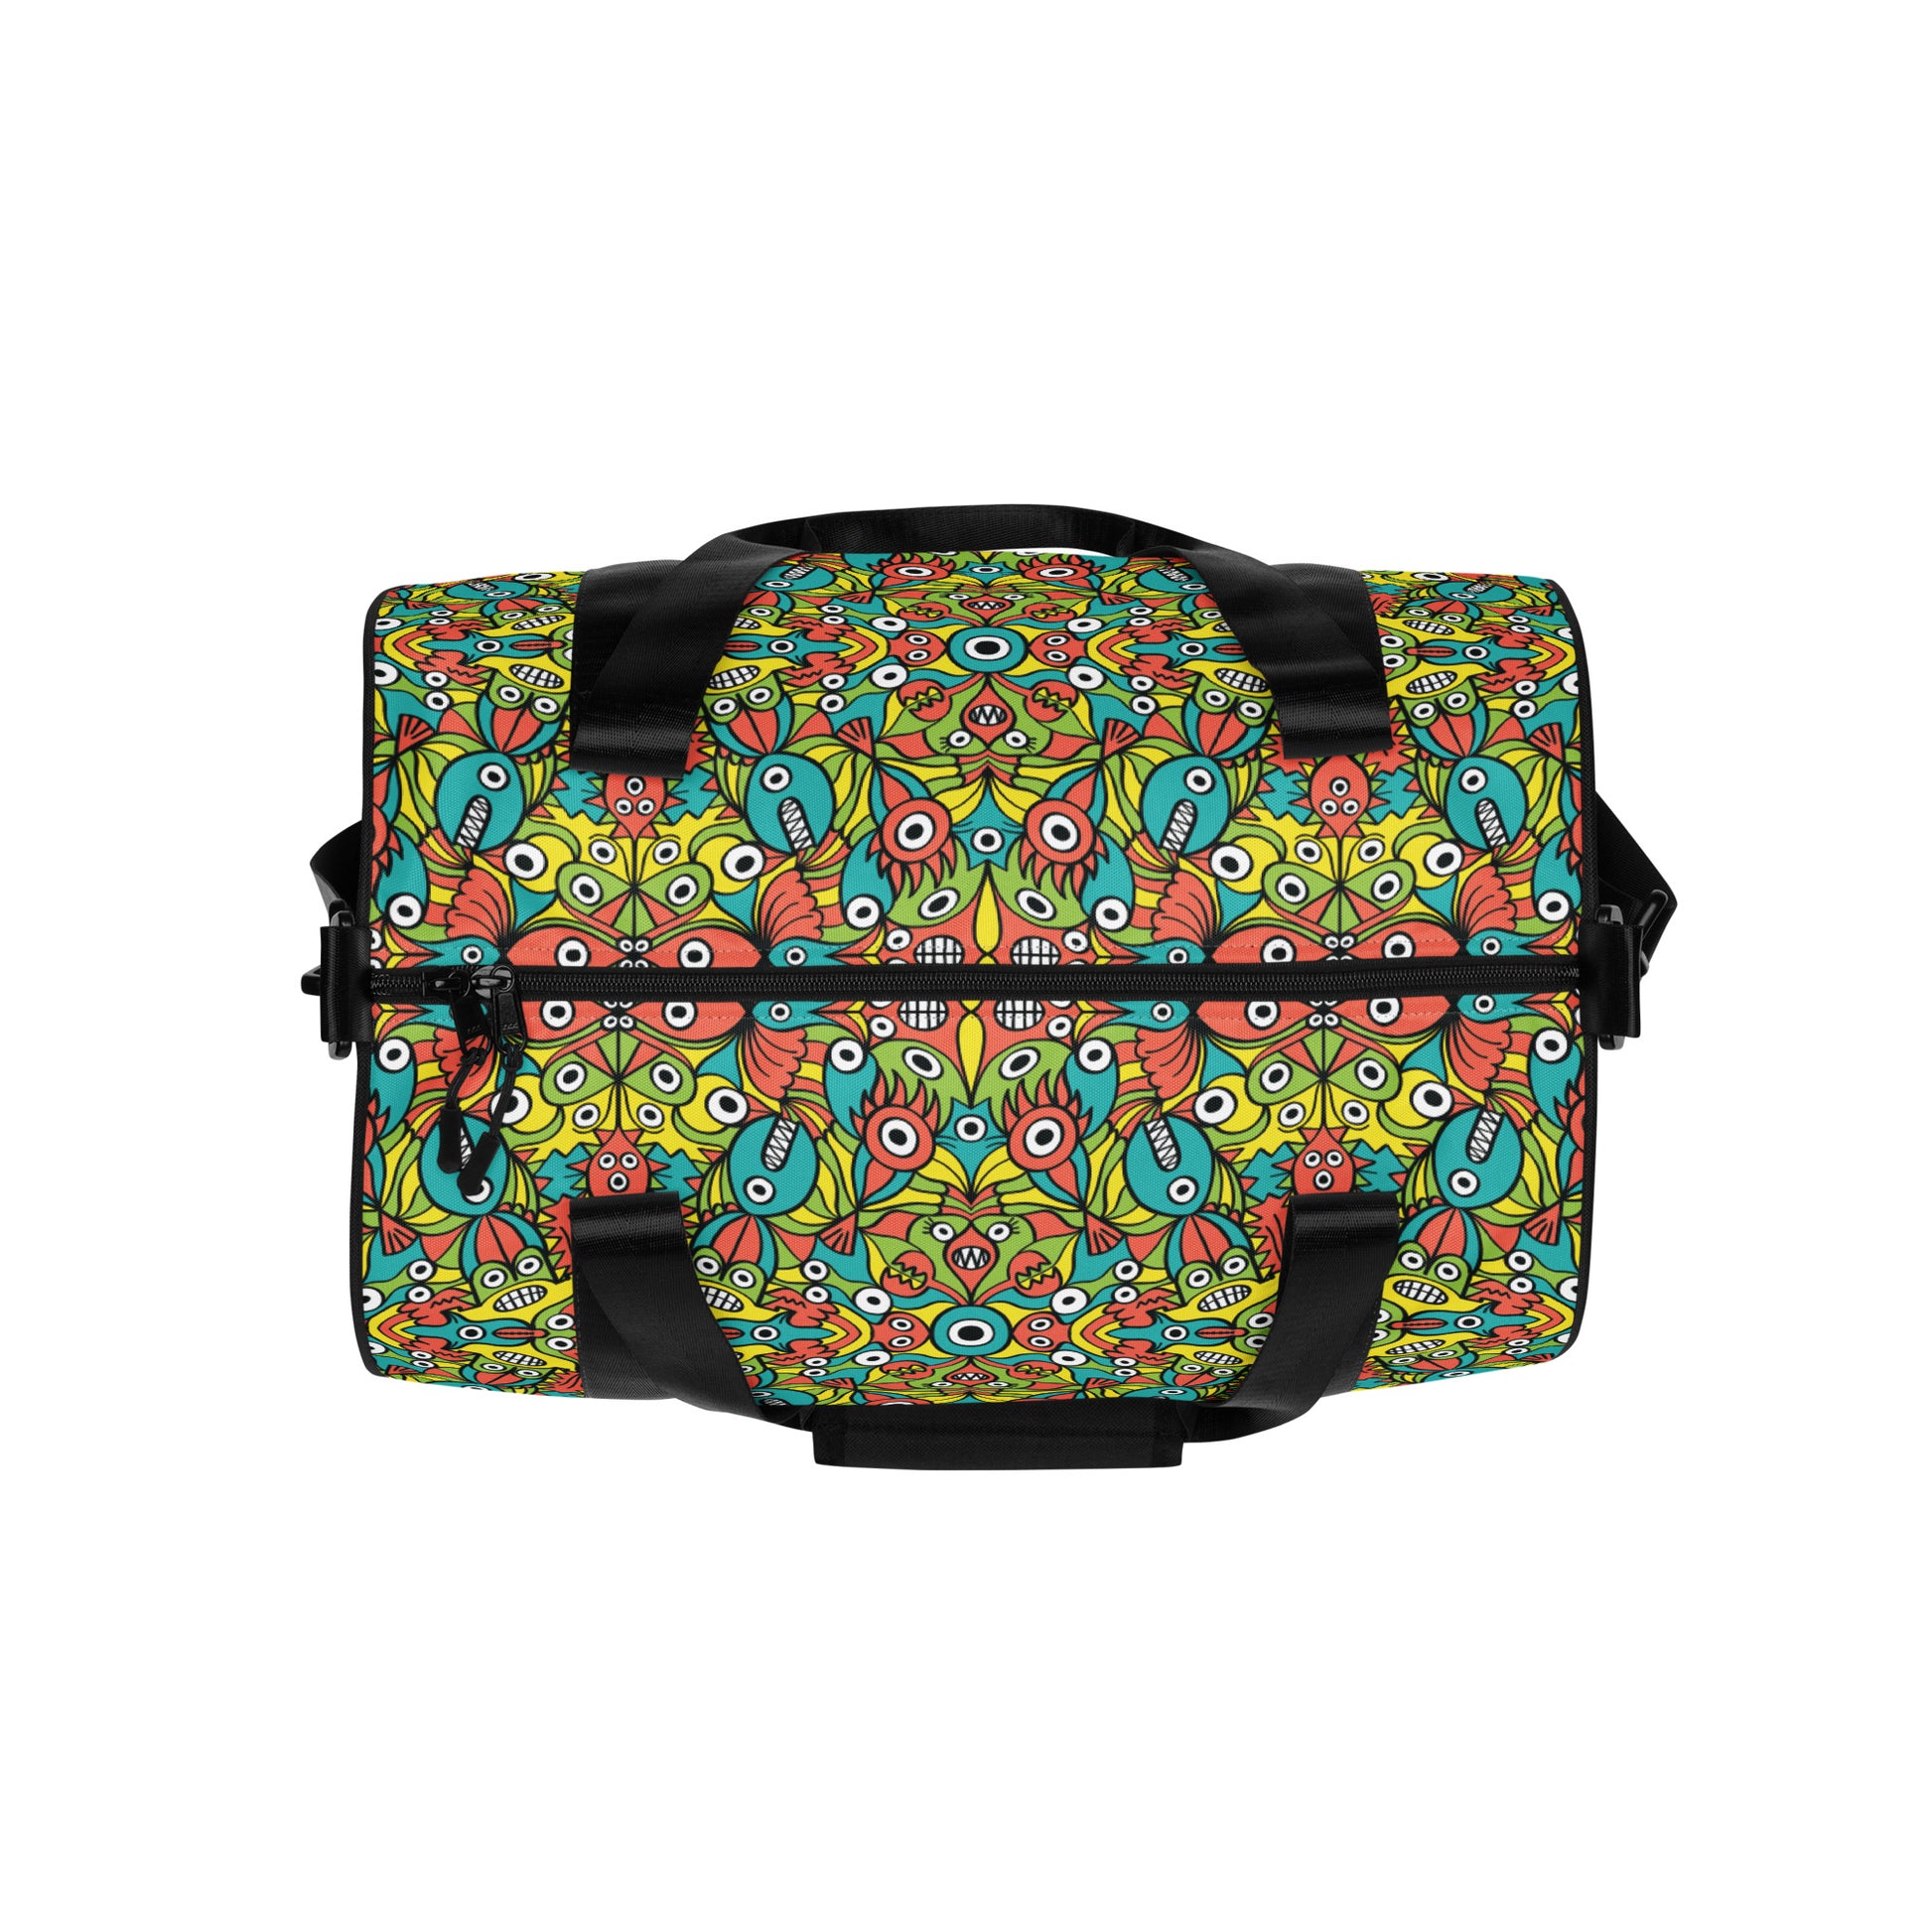 Alien monsters pattern design All-over print gym bag. Top view